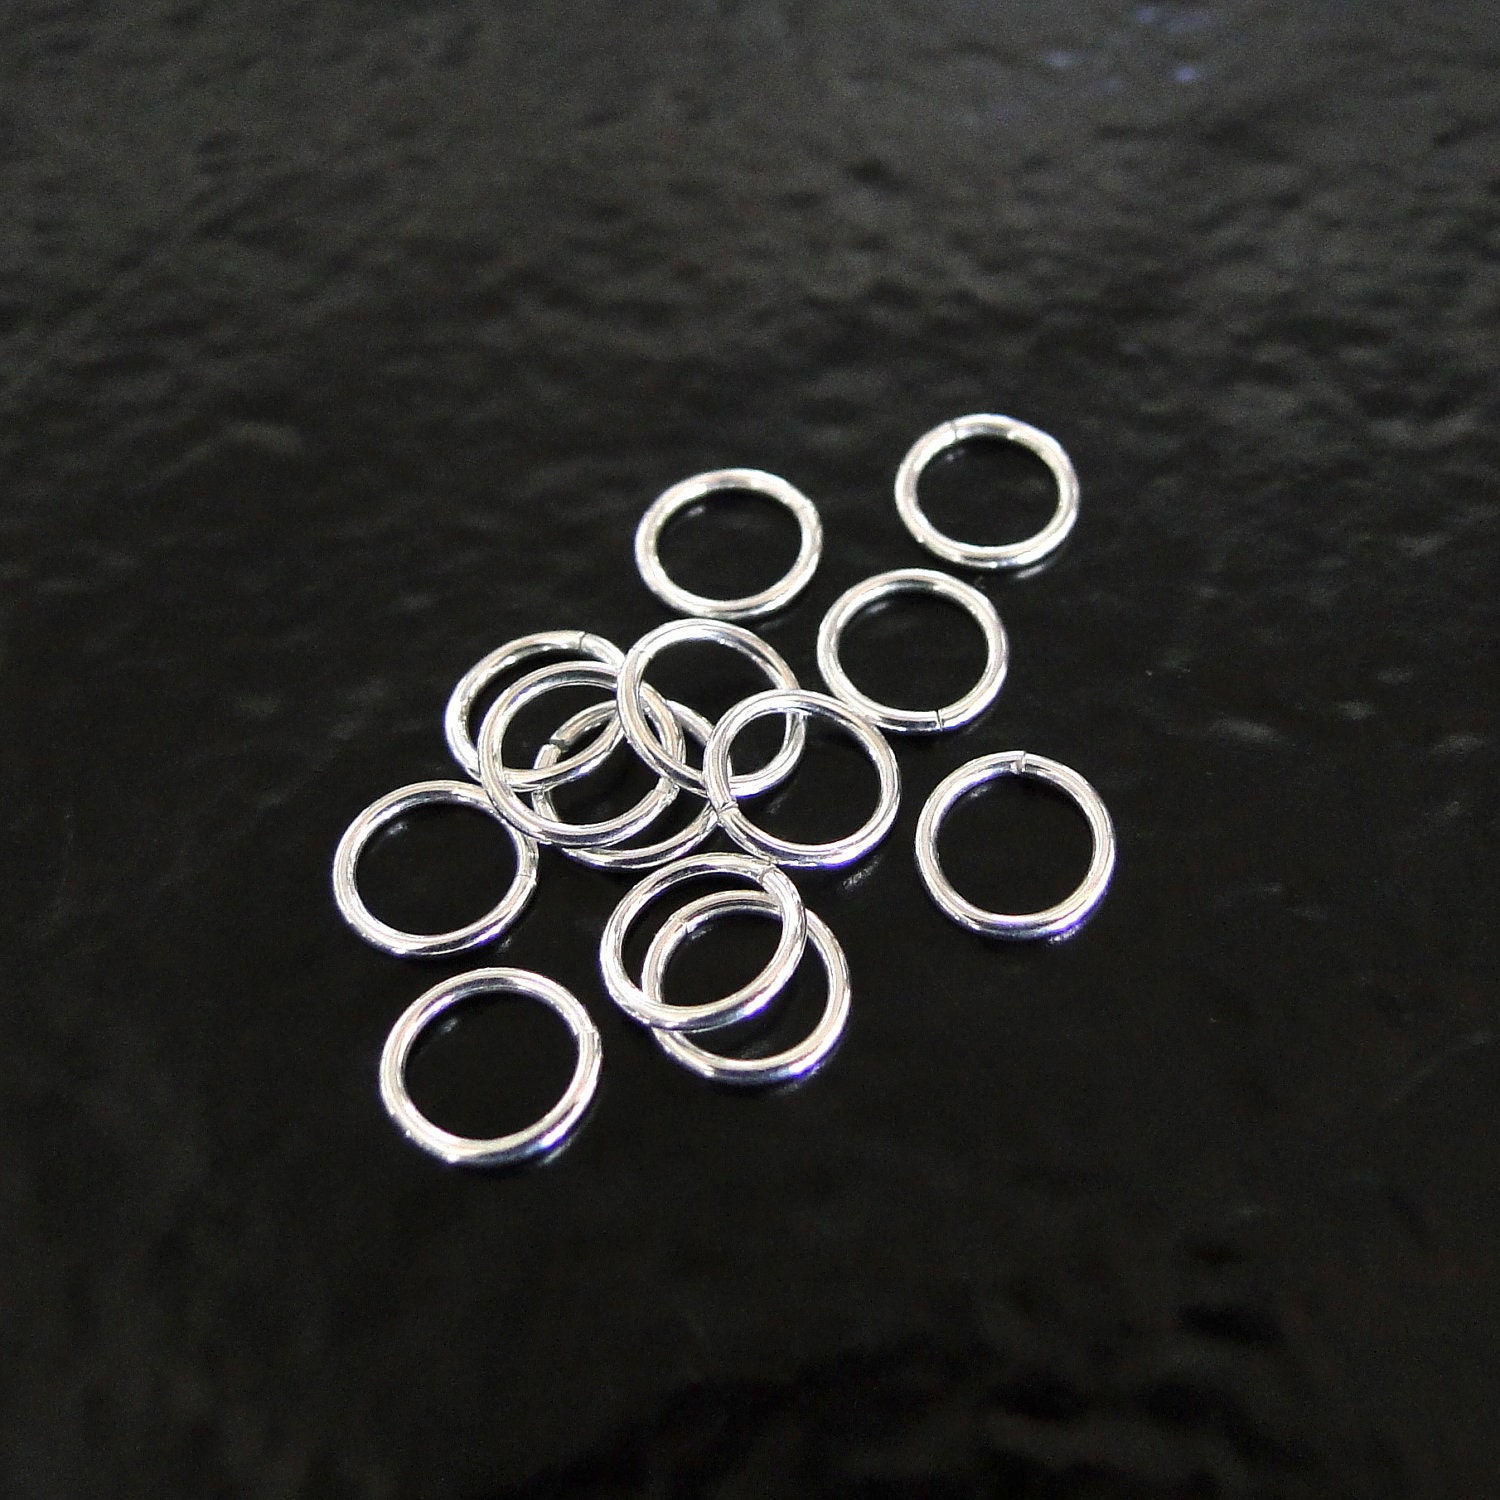 Wholesale 20pcs/lot 3 4 5 6 mm 925 Sterling Silver Jump Rings